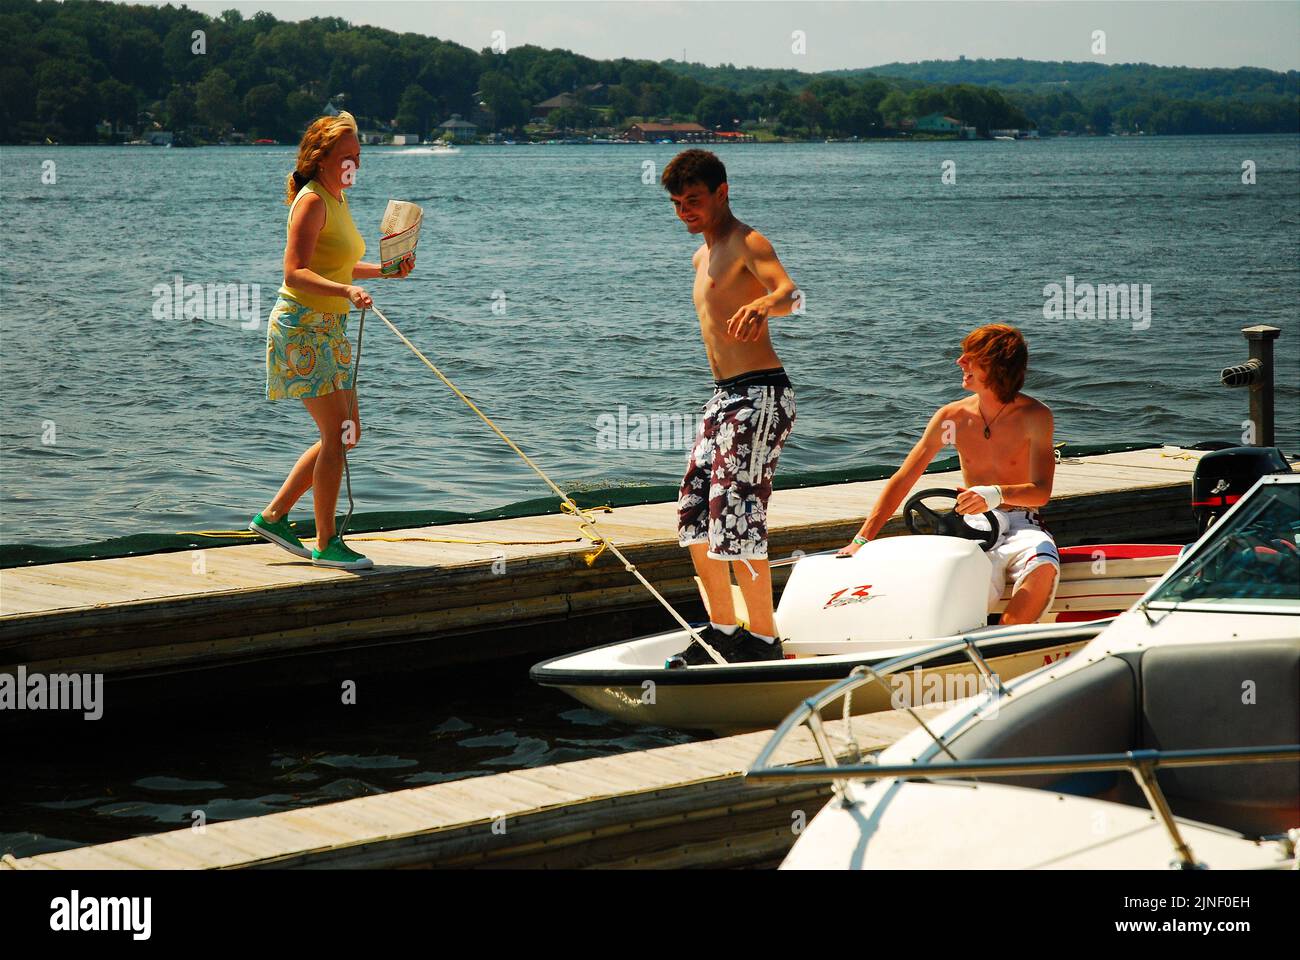 An adult woman helps two teenage boys bring their small boat into the dock for tying on a beautiful summer vacation day on  the lake Stock Photo